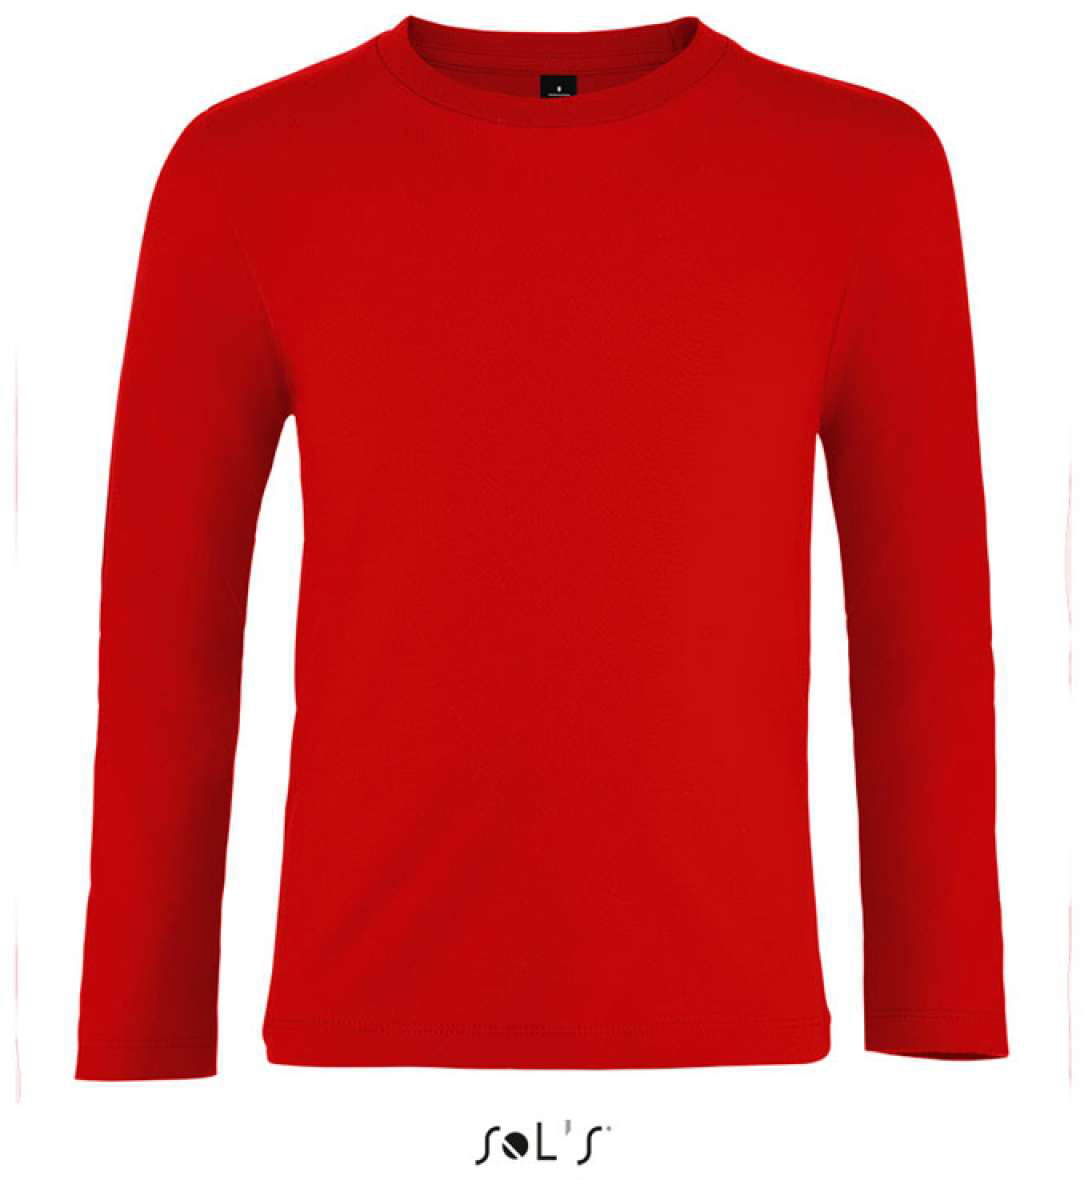 Sol's imperial Lsl Kids - Long Sleeve T-shirt - Sol's imperial Lsl Kids - Long Sleeve T-shirt - Red